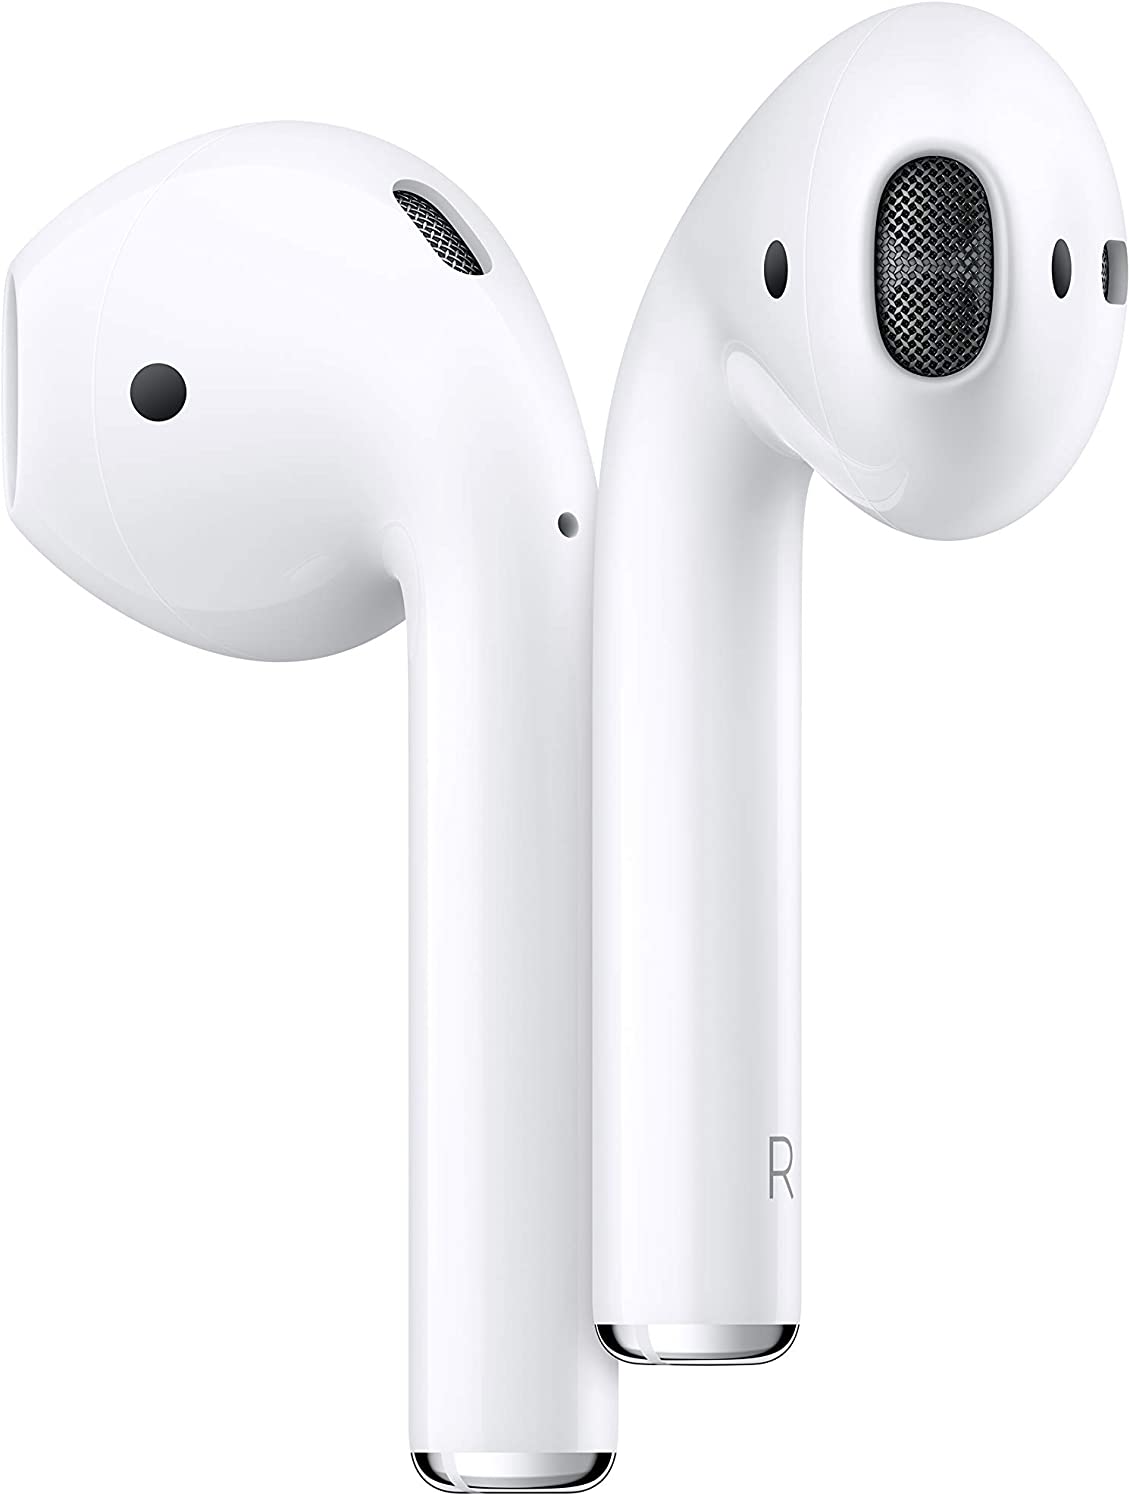 Apple AirPods home office